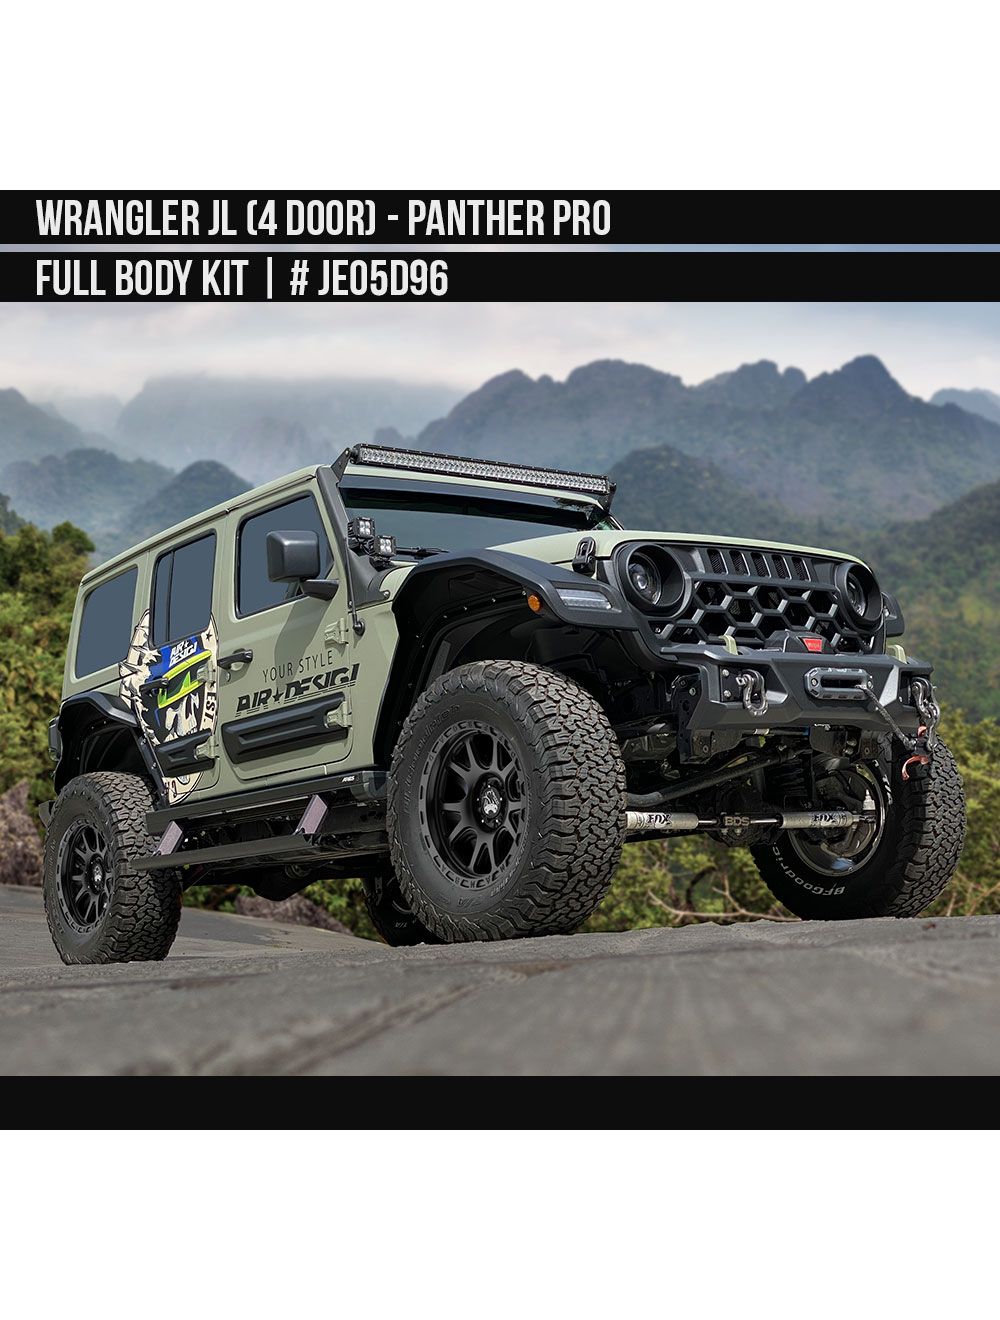 Panther Pro Body Kit for Wrangler. Aggressive Off-Road Look!